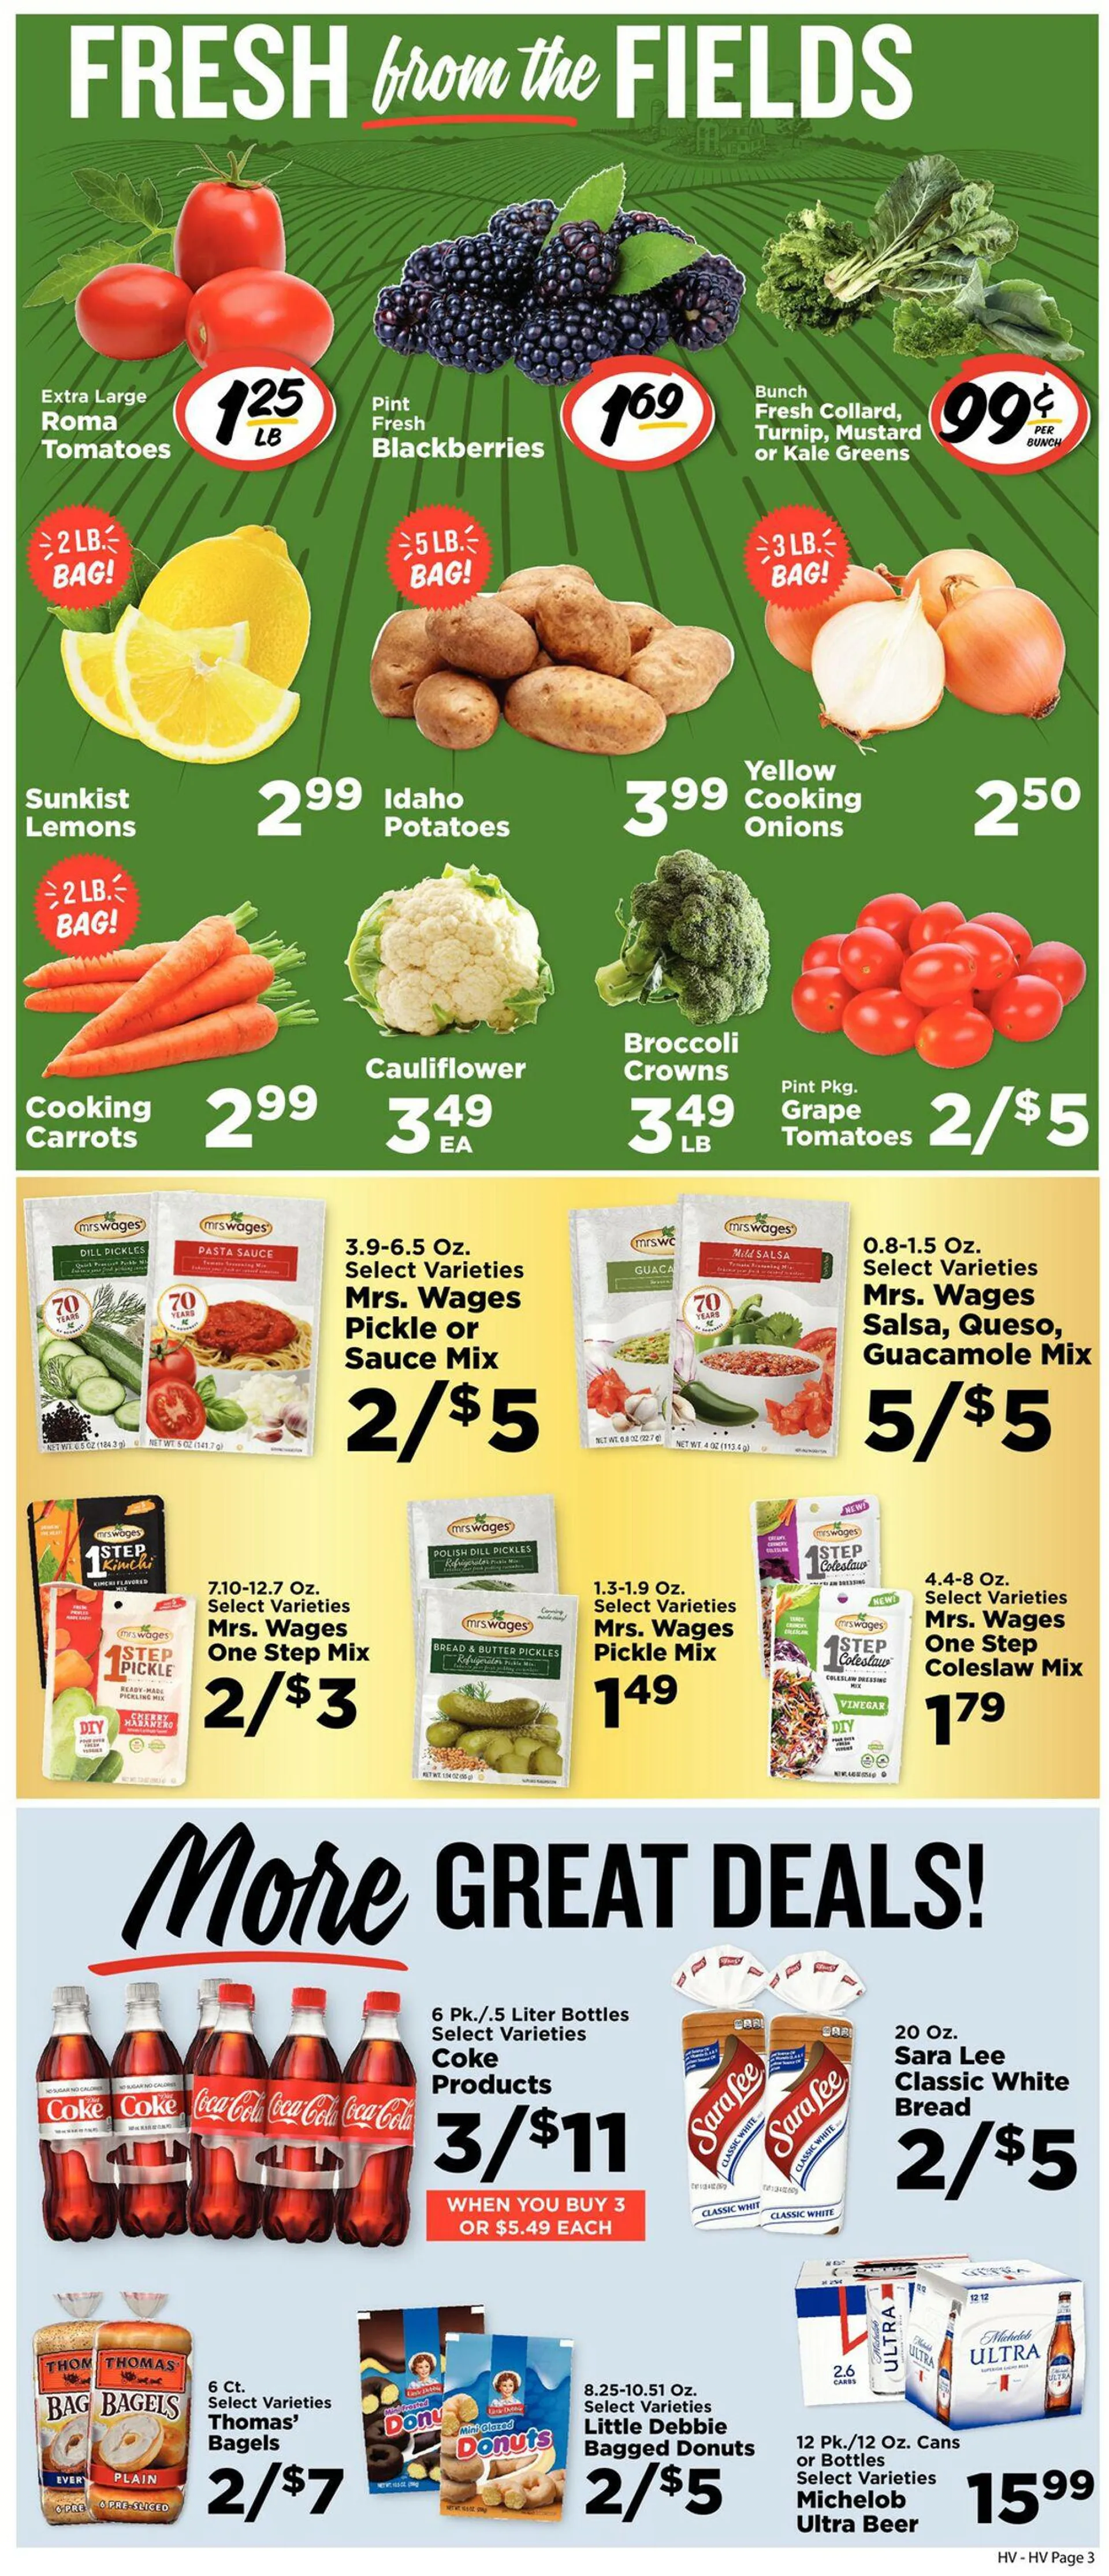 Hometown Market Current weekly ad - 3